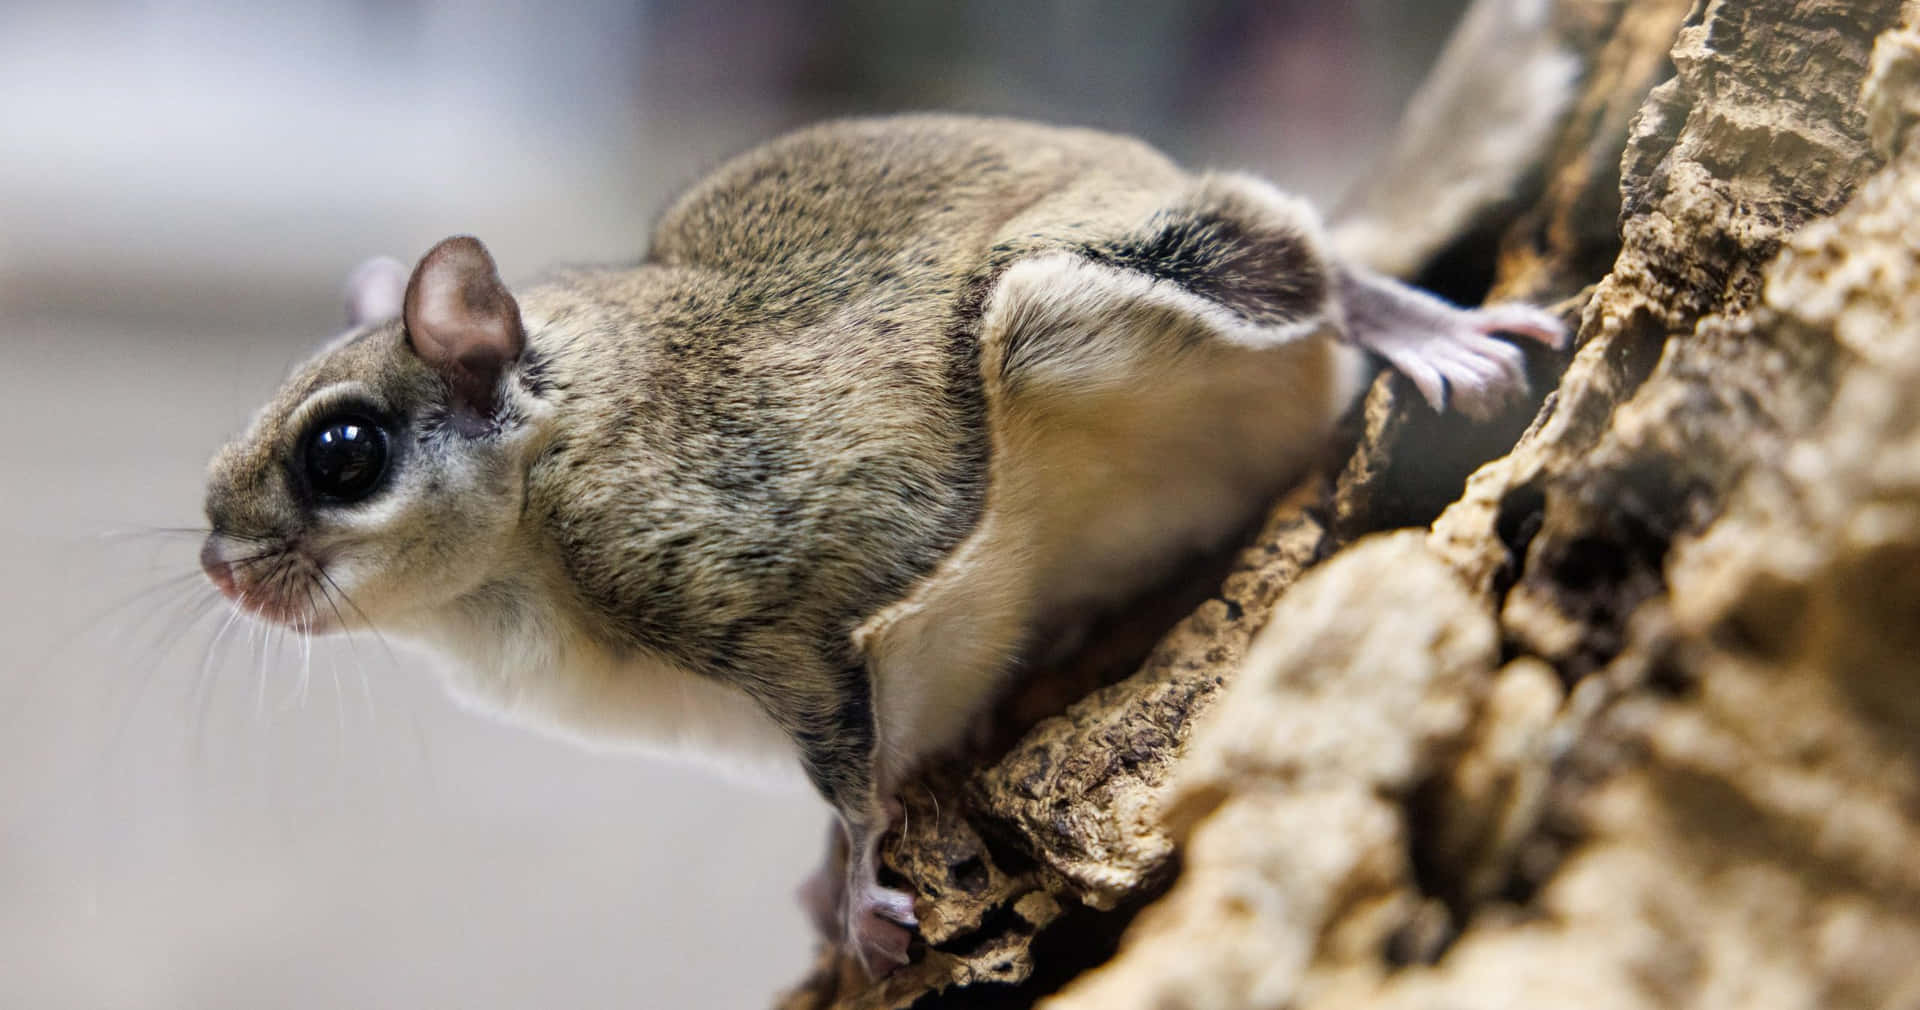 Taking Flight - A Flying Squirrel Spreads Its Wings